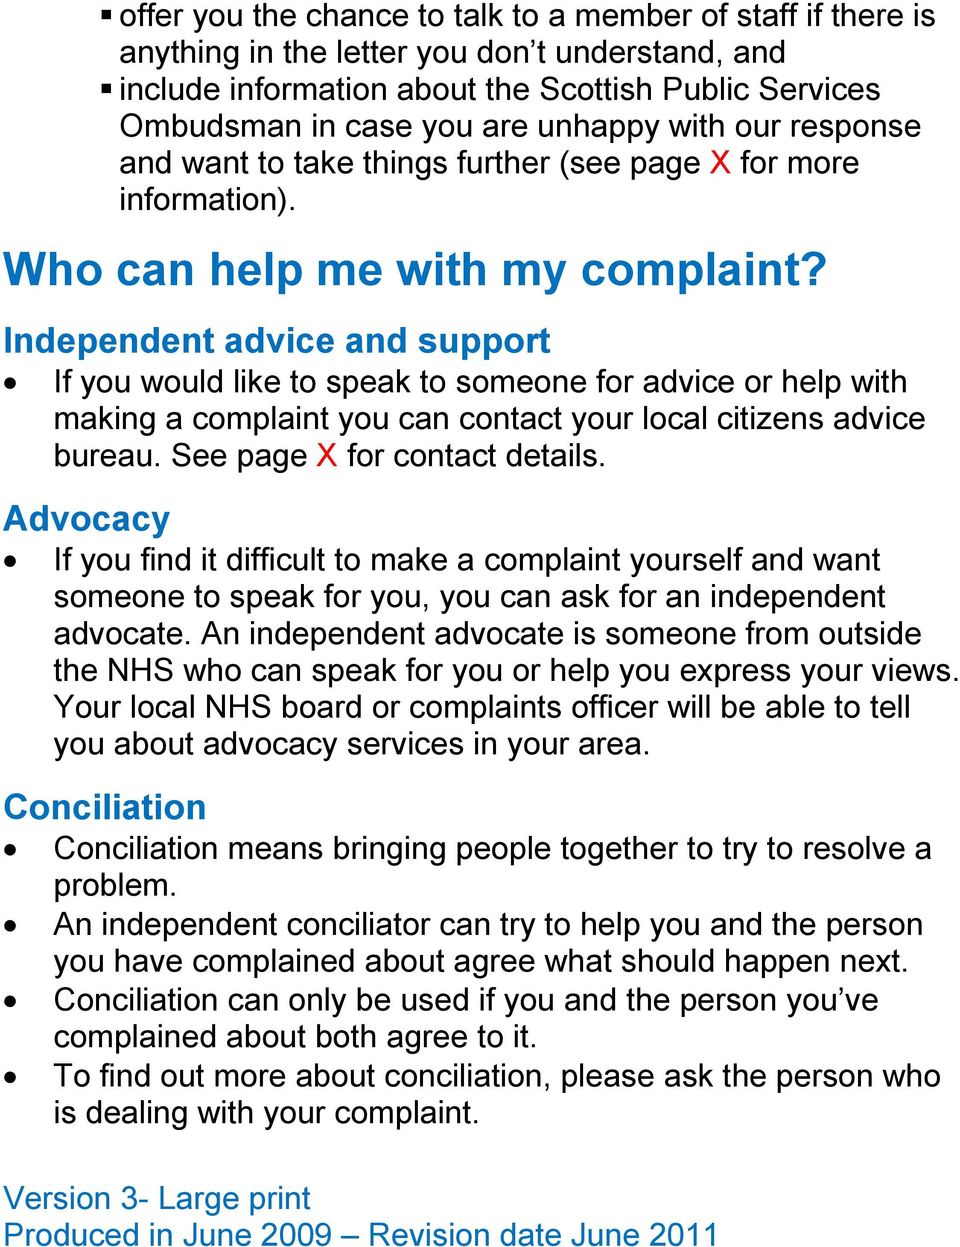 Independent advice and support If you would like to speak to someone for advice or help with making a complaint you can contact your local citizens advice bureau. See page X for contact details.